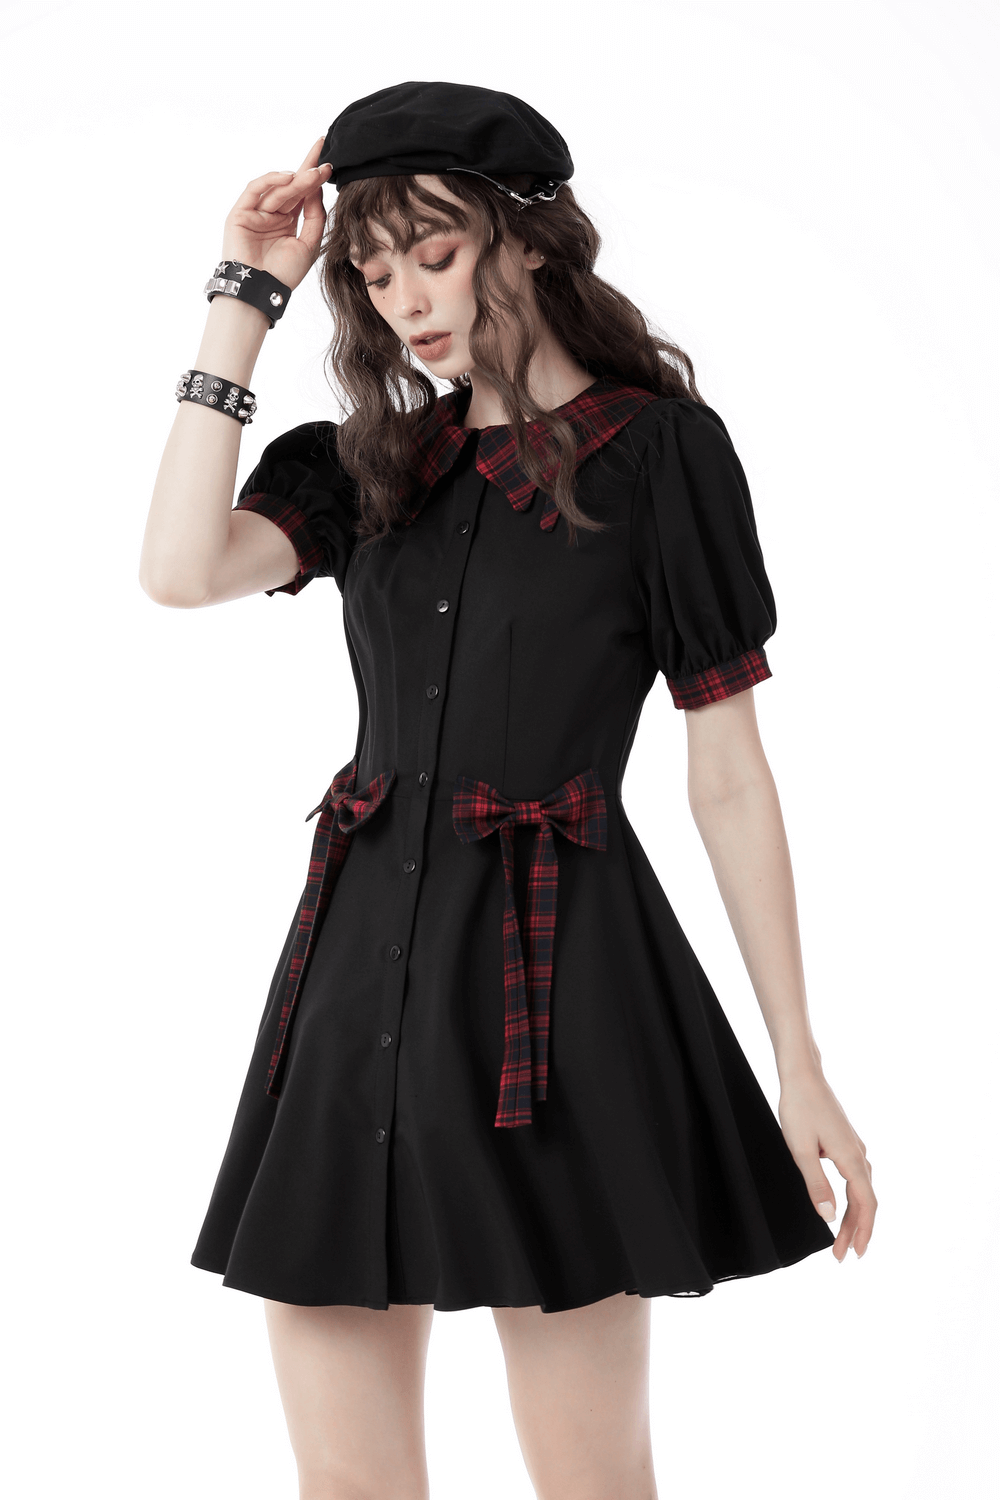 Trendy Black Dress with Plaid Accents and Bow Detail